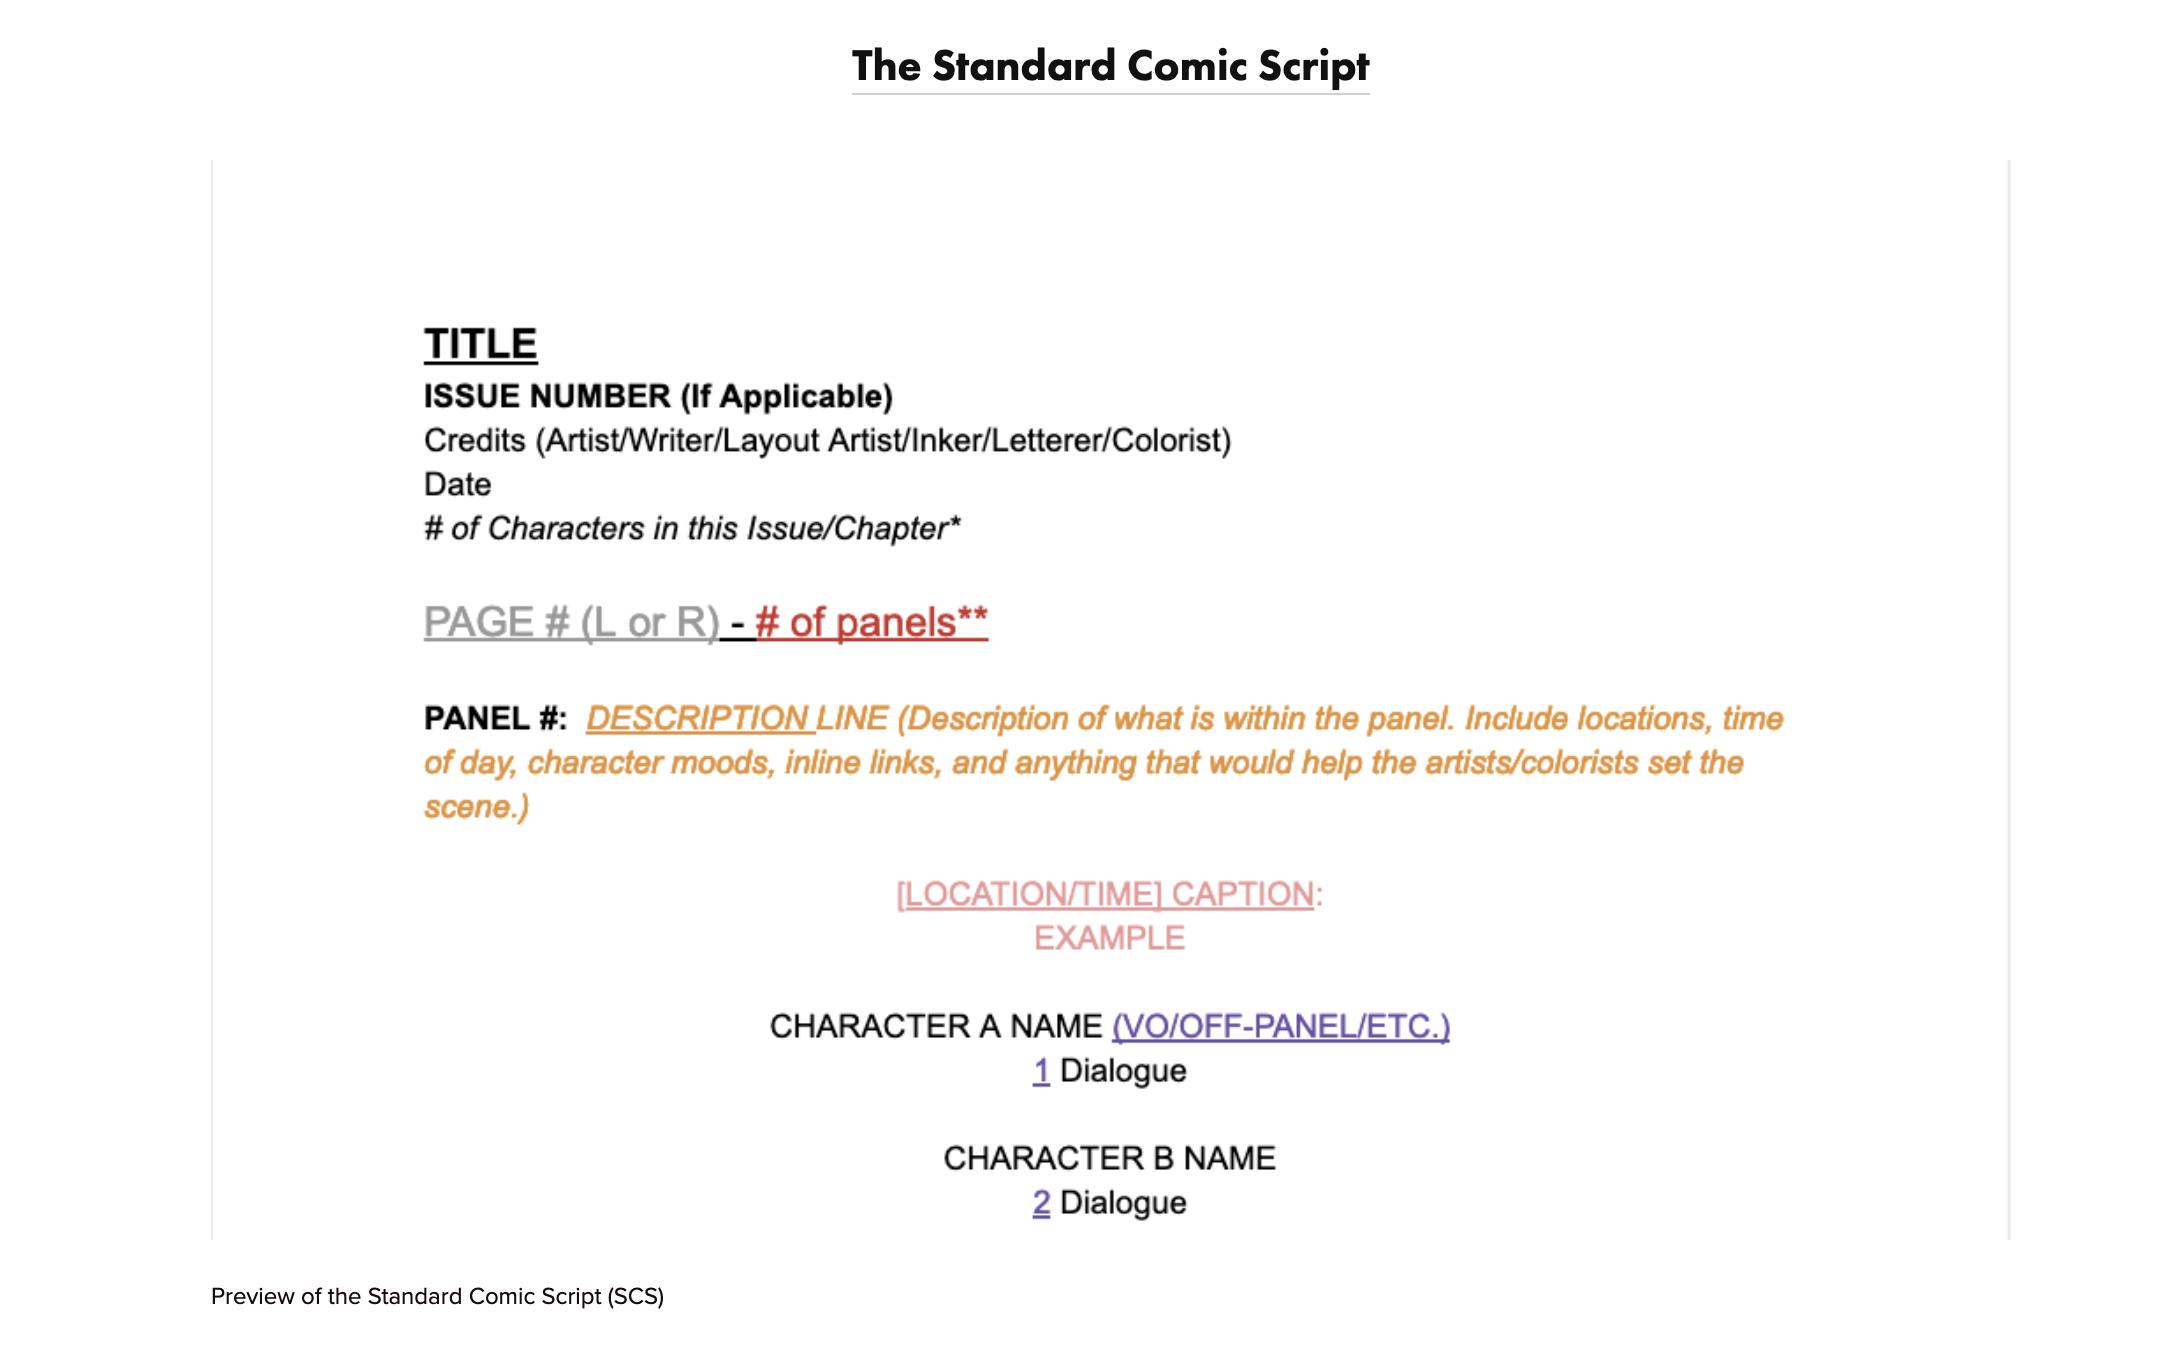 People have a lot of opinions on new Standard Comic Script (SCS) template